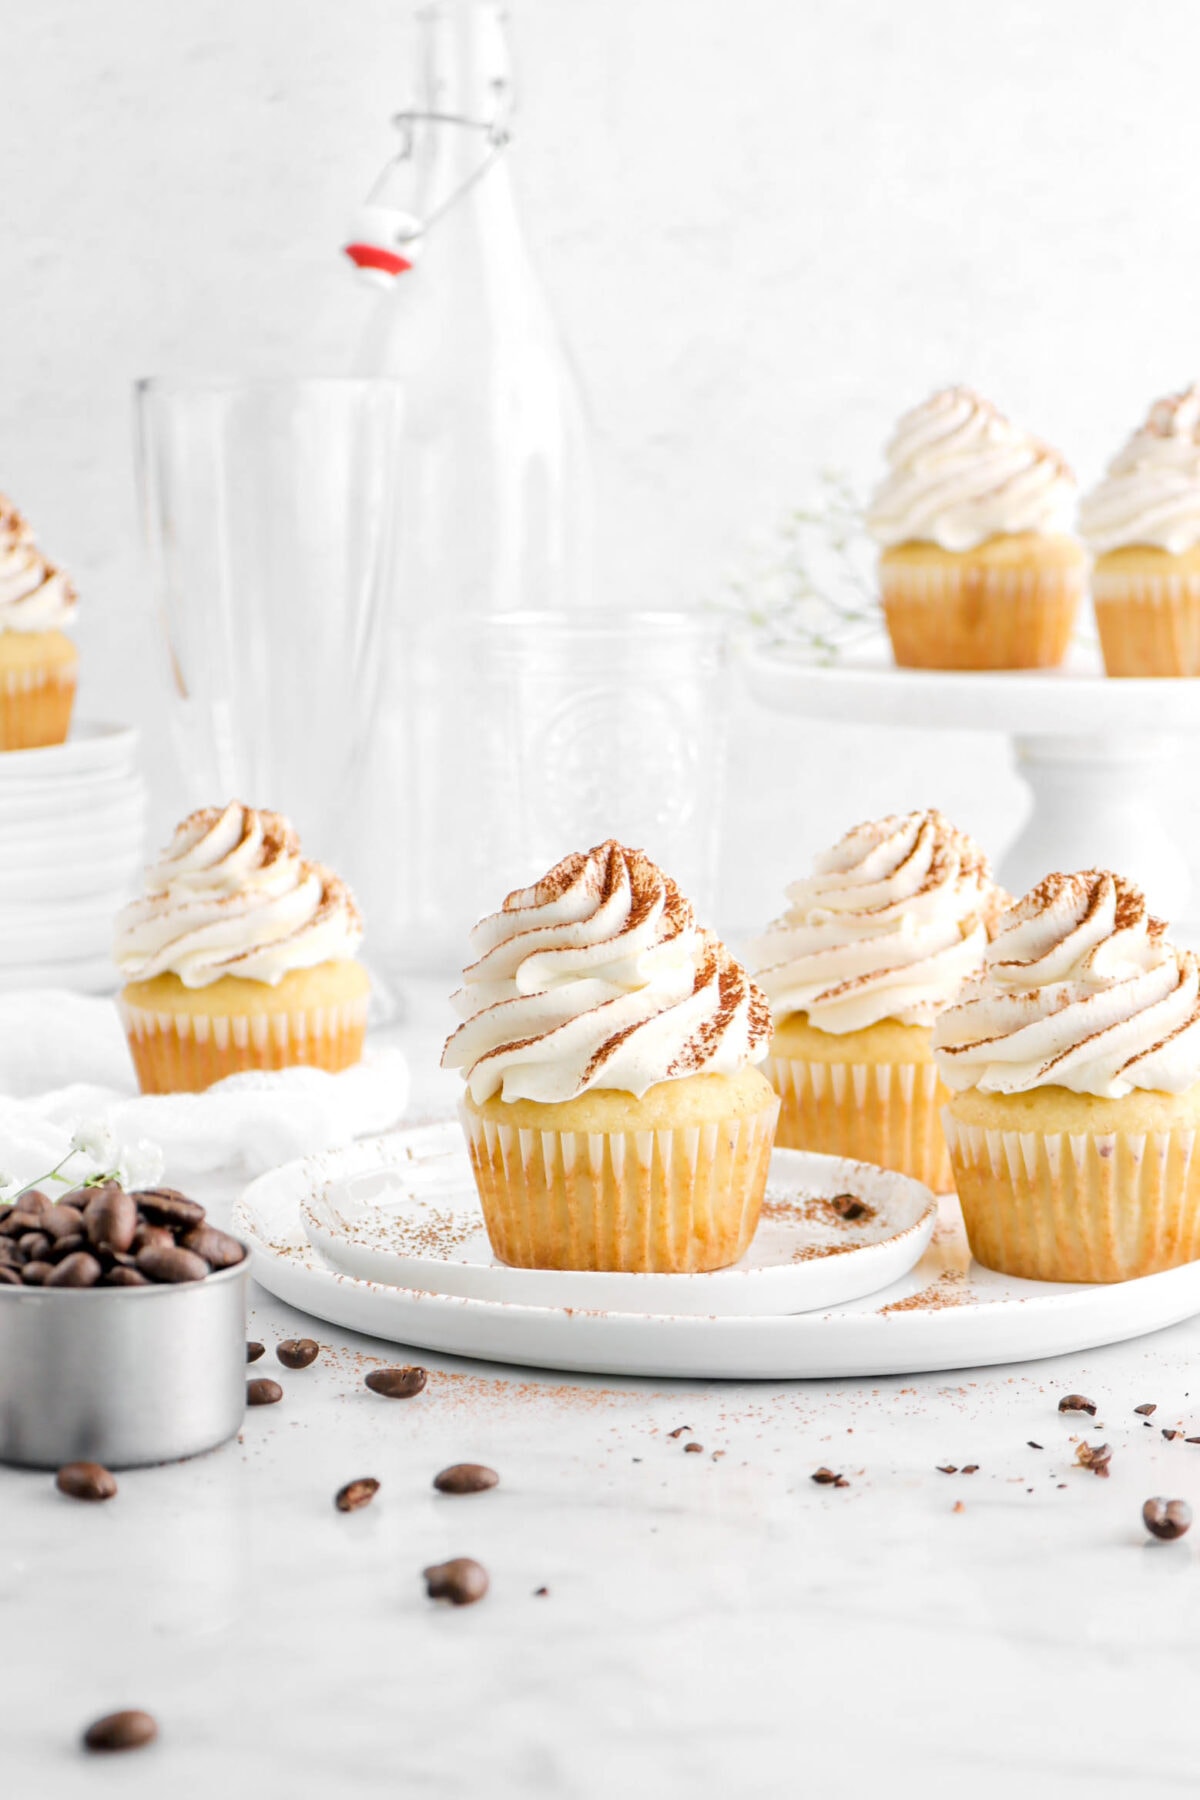 front shot of tiramisu cupcakes on white plates with coffee beans scattered around, a cake plate behind with empty glasses